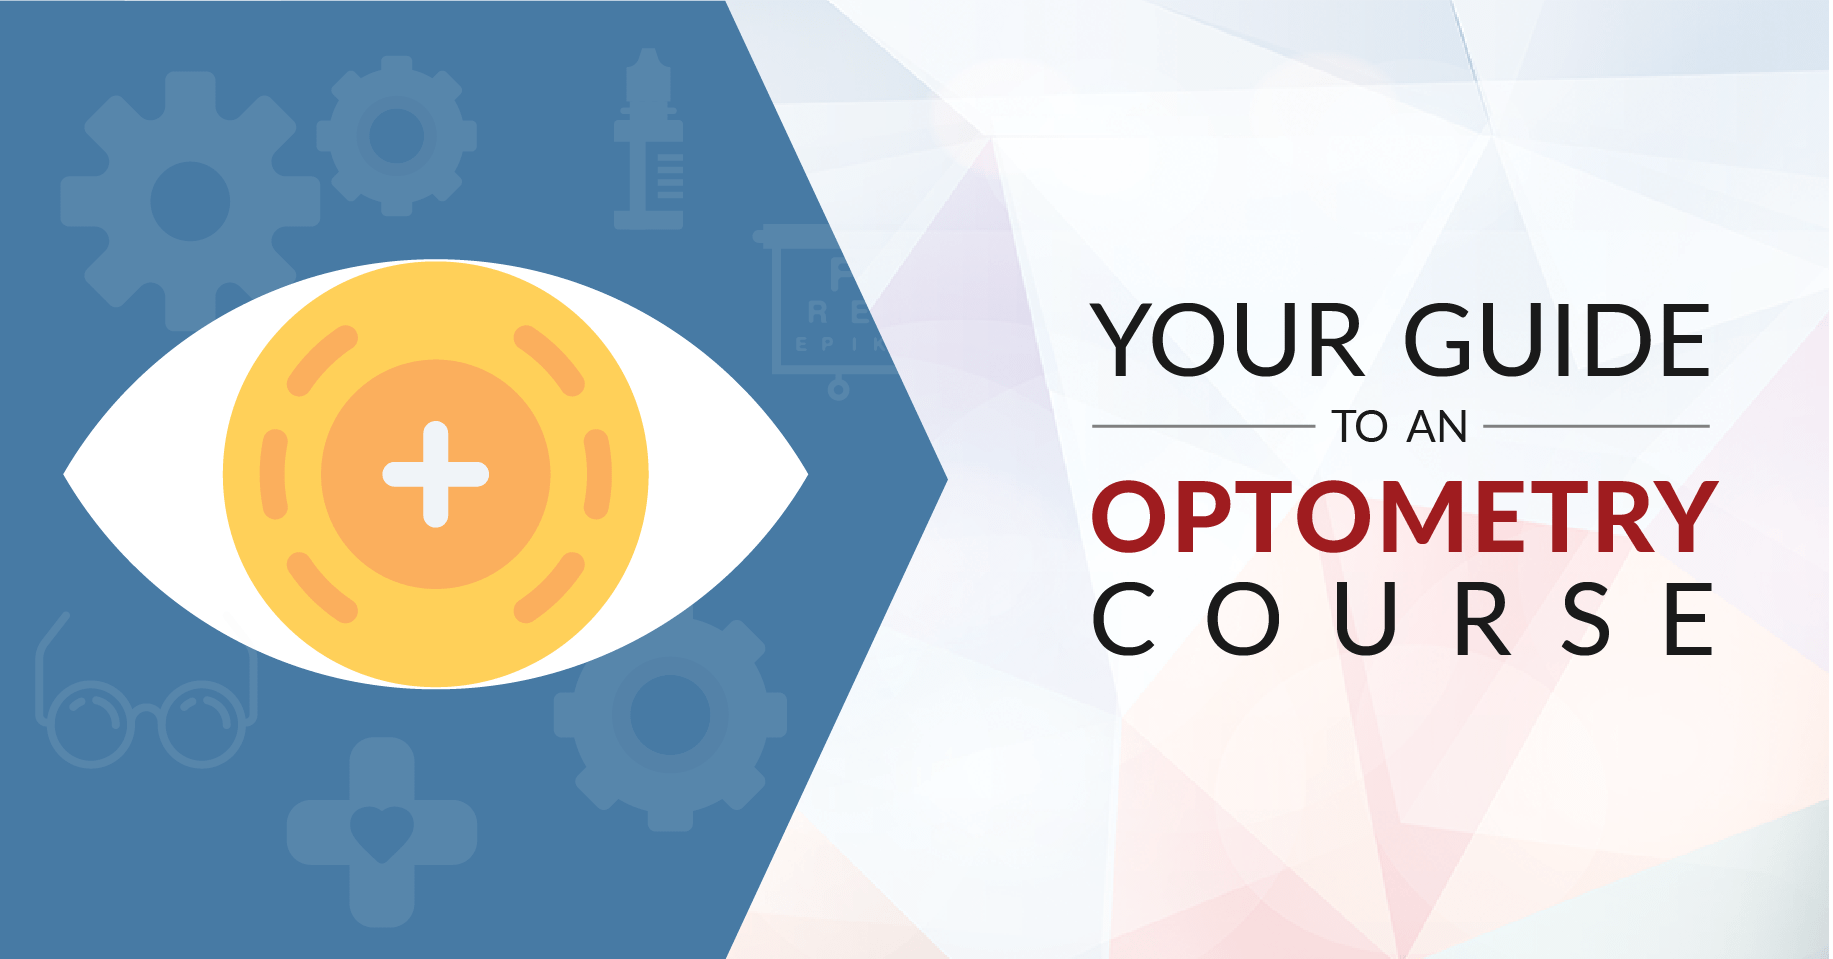 course-guide-optometry-feature-image